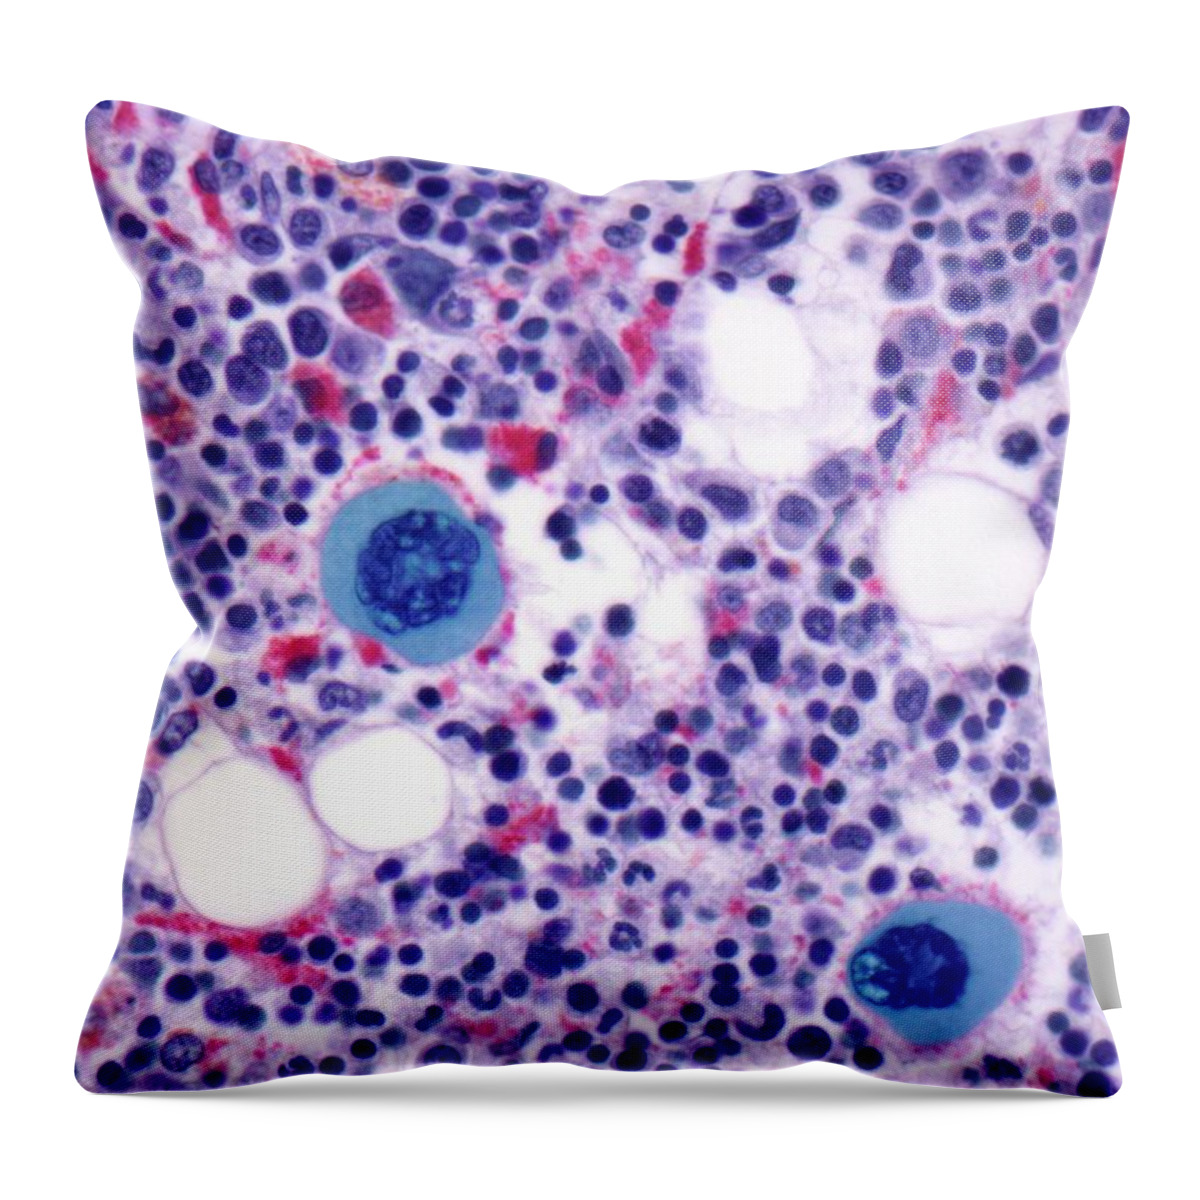 Anatomy Throw Pillow featuring the digital art Bone Marrow, Light Micrograph by Science Photo Library - Steve Gschmeissner